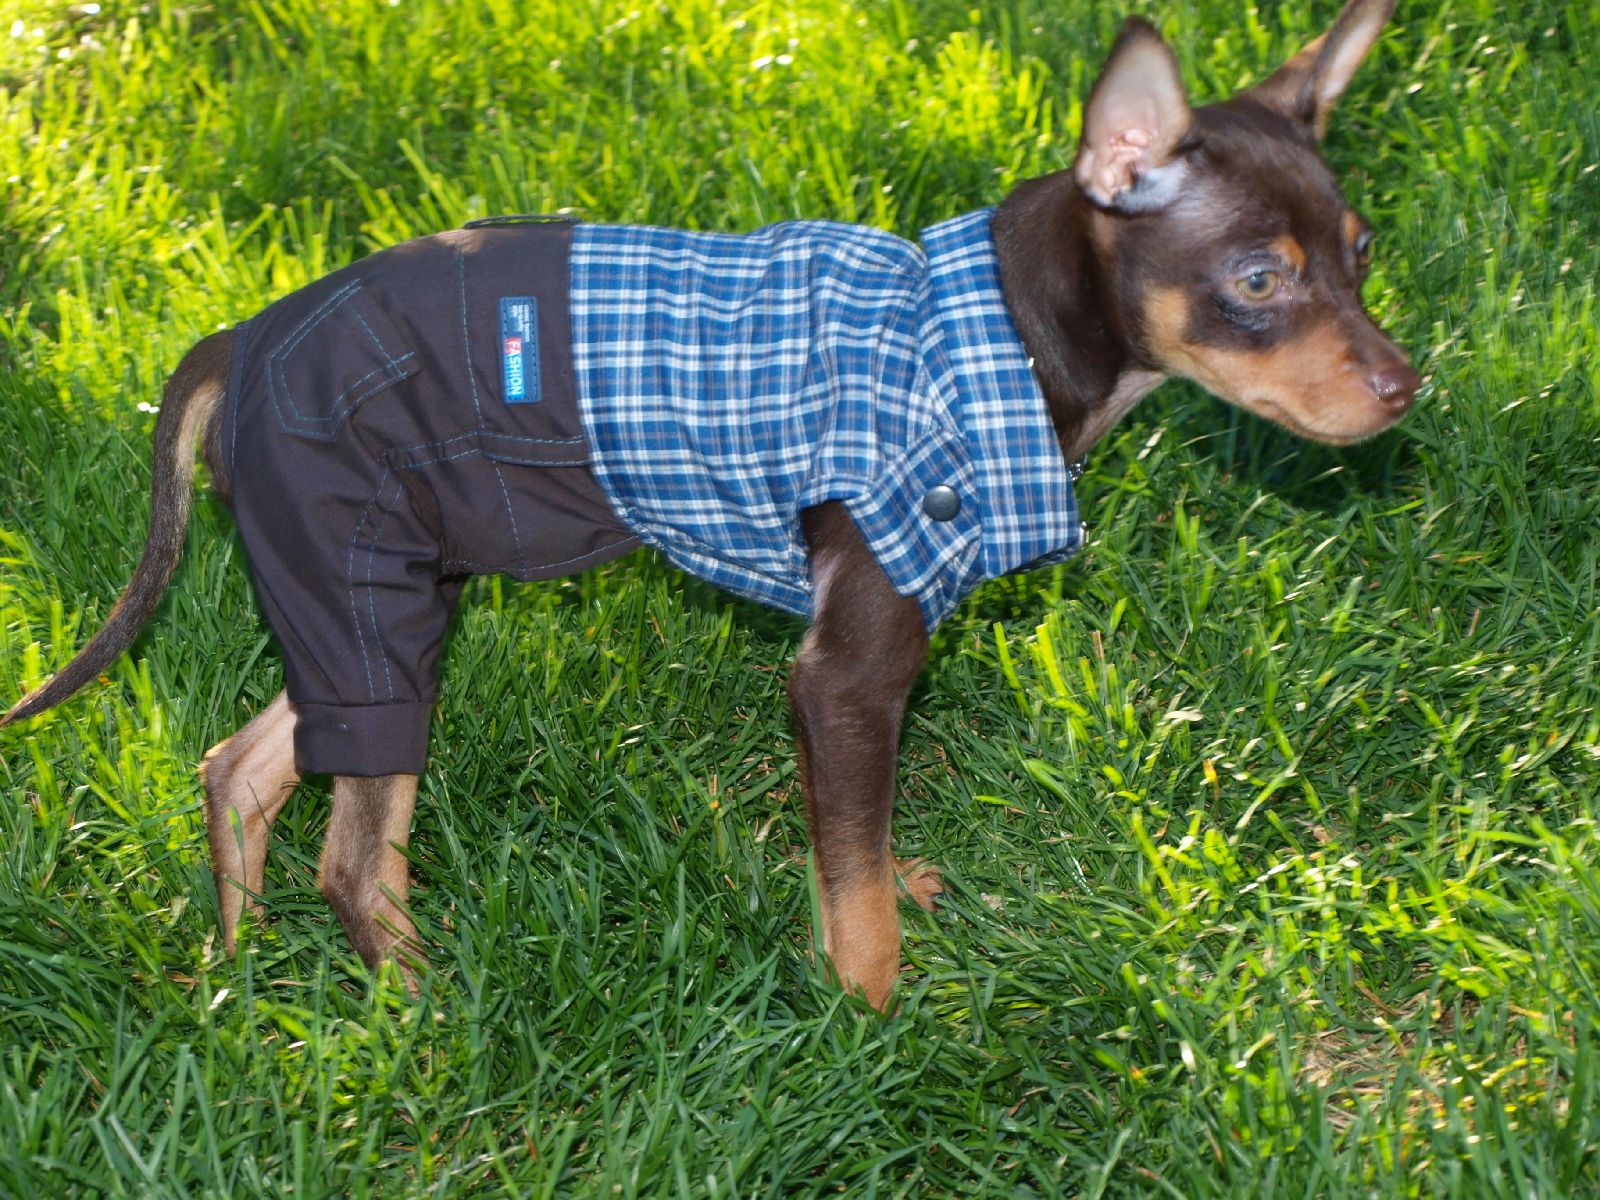 Miniature Pinscher dressed up like a boy wallpaper and image, picture, photo